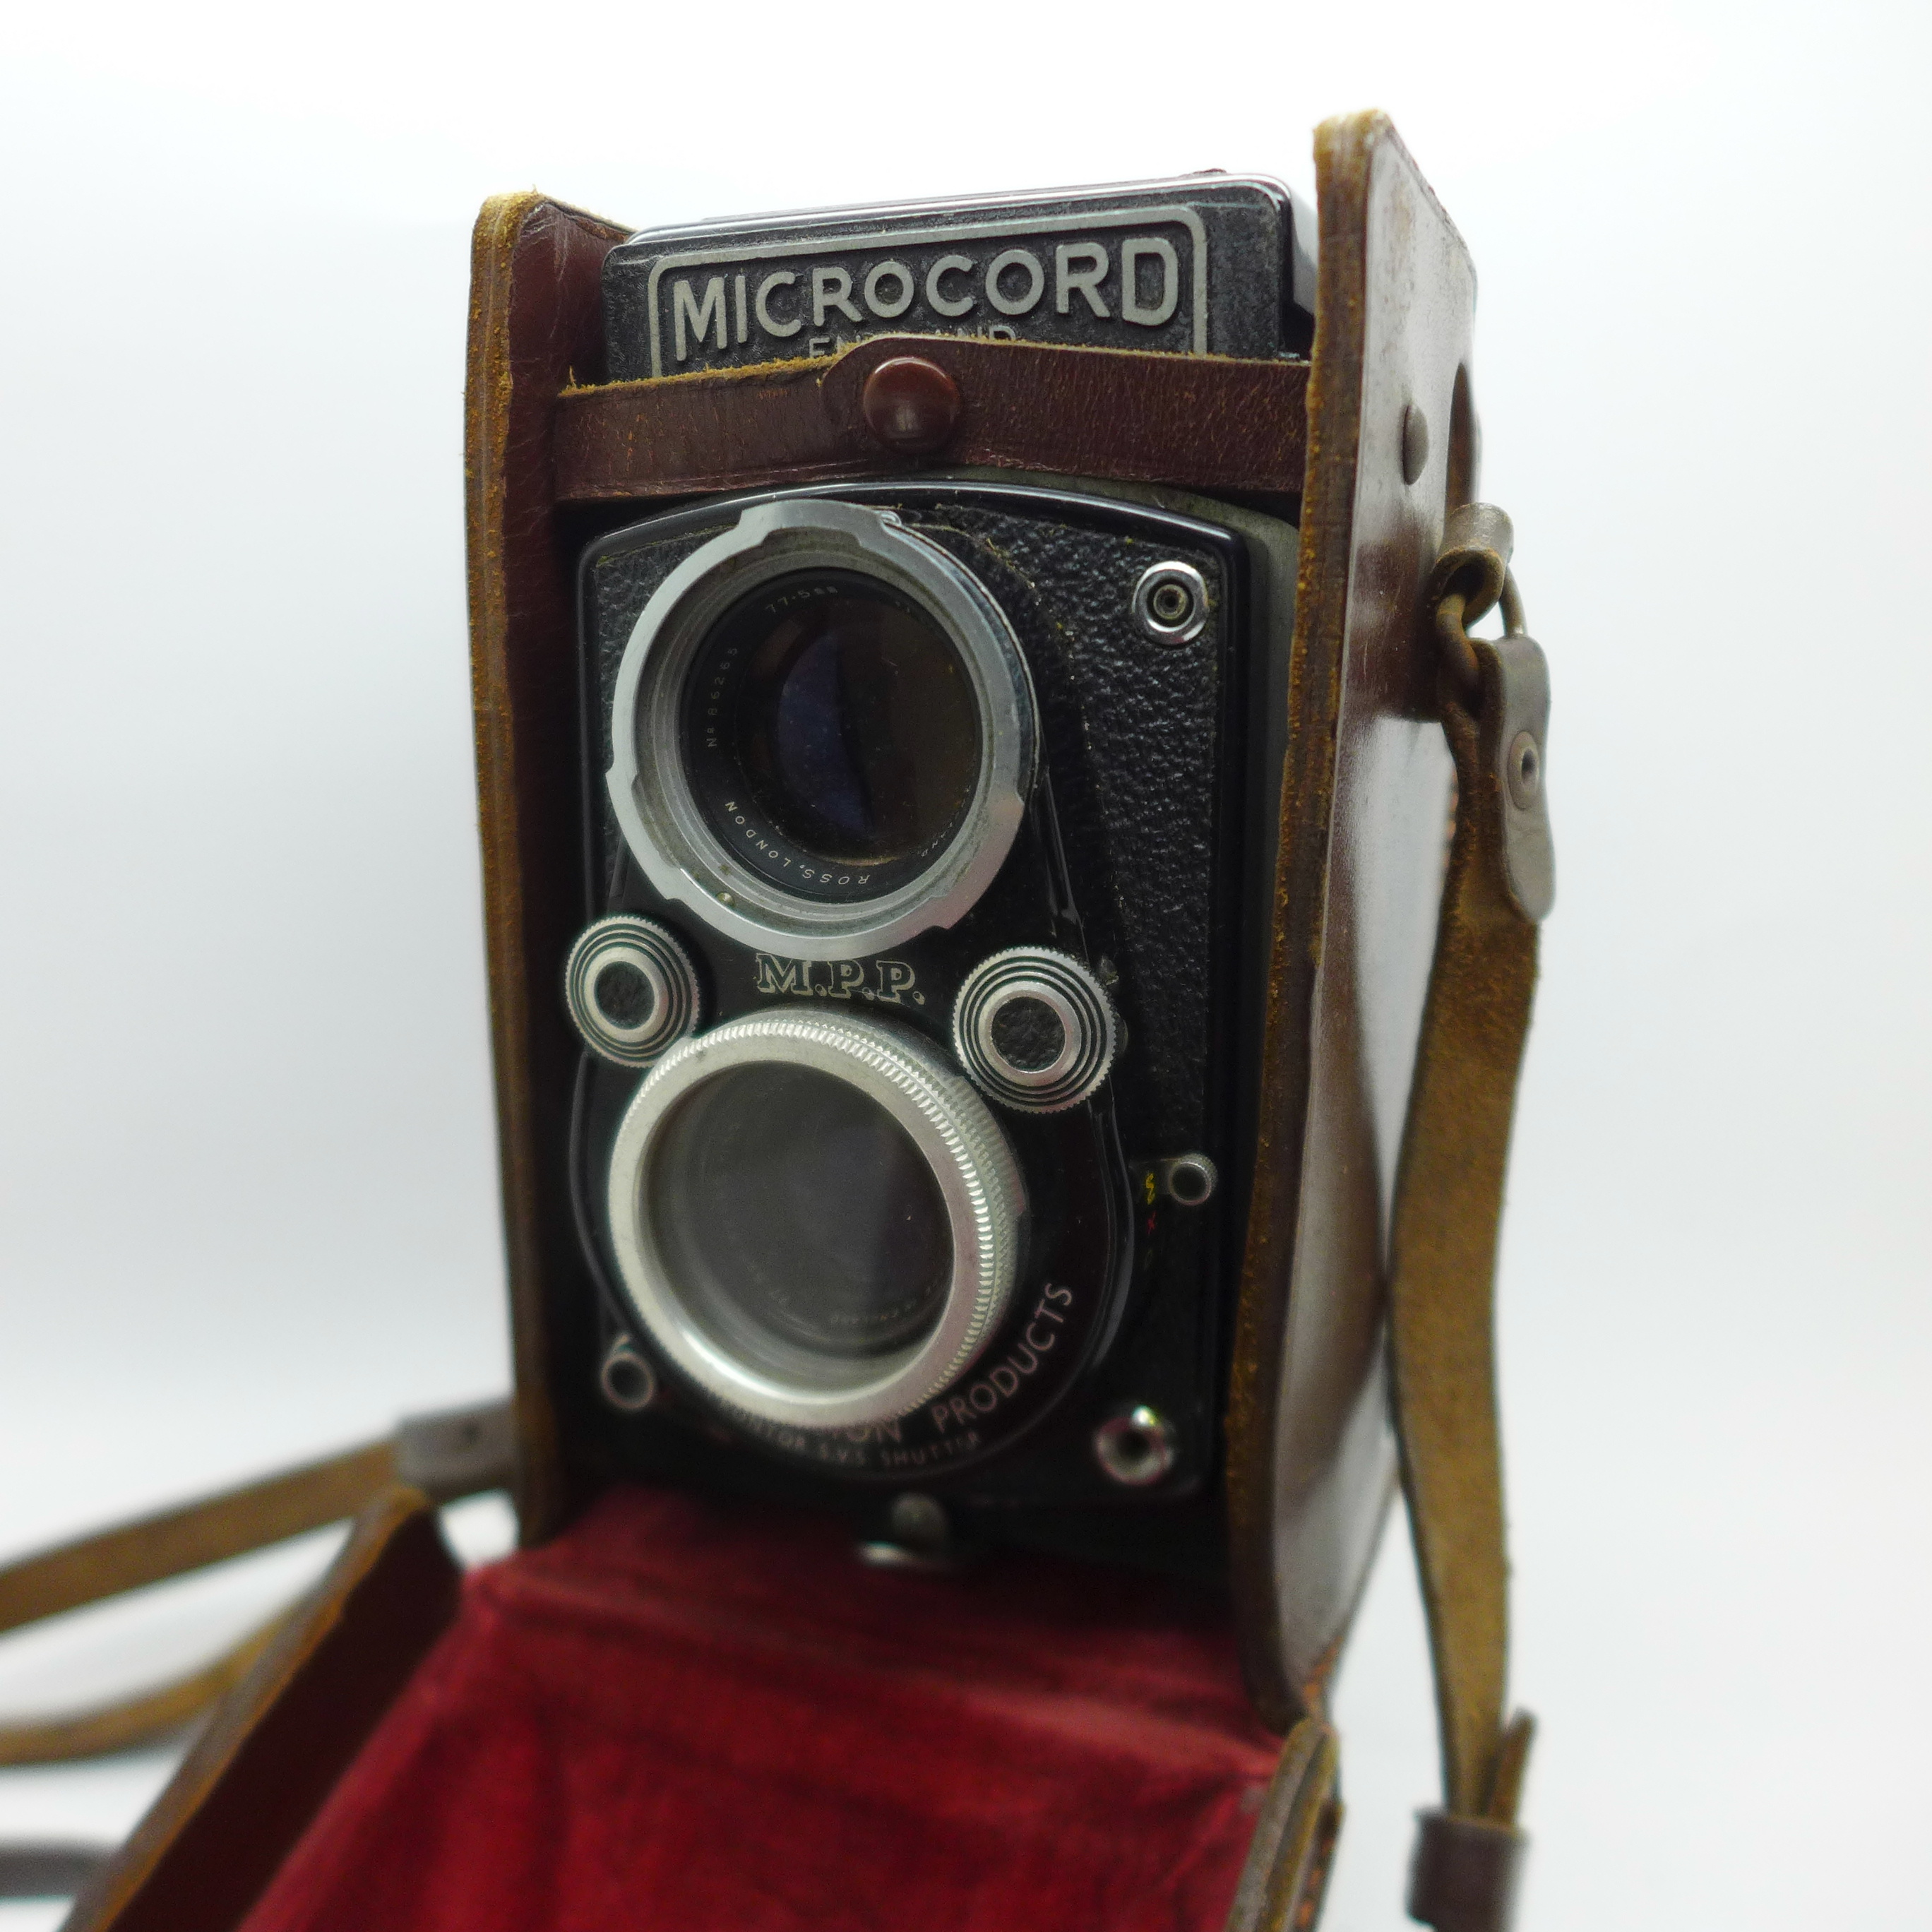 A Microcord camera, 77.5mm, f/3.2, Ross, London, and a light meter - Image 2 of 4